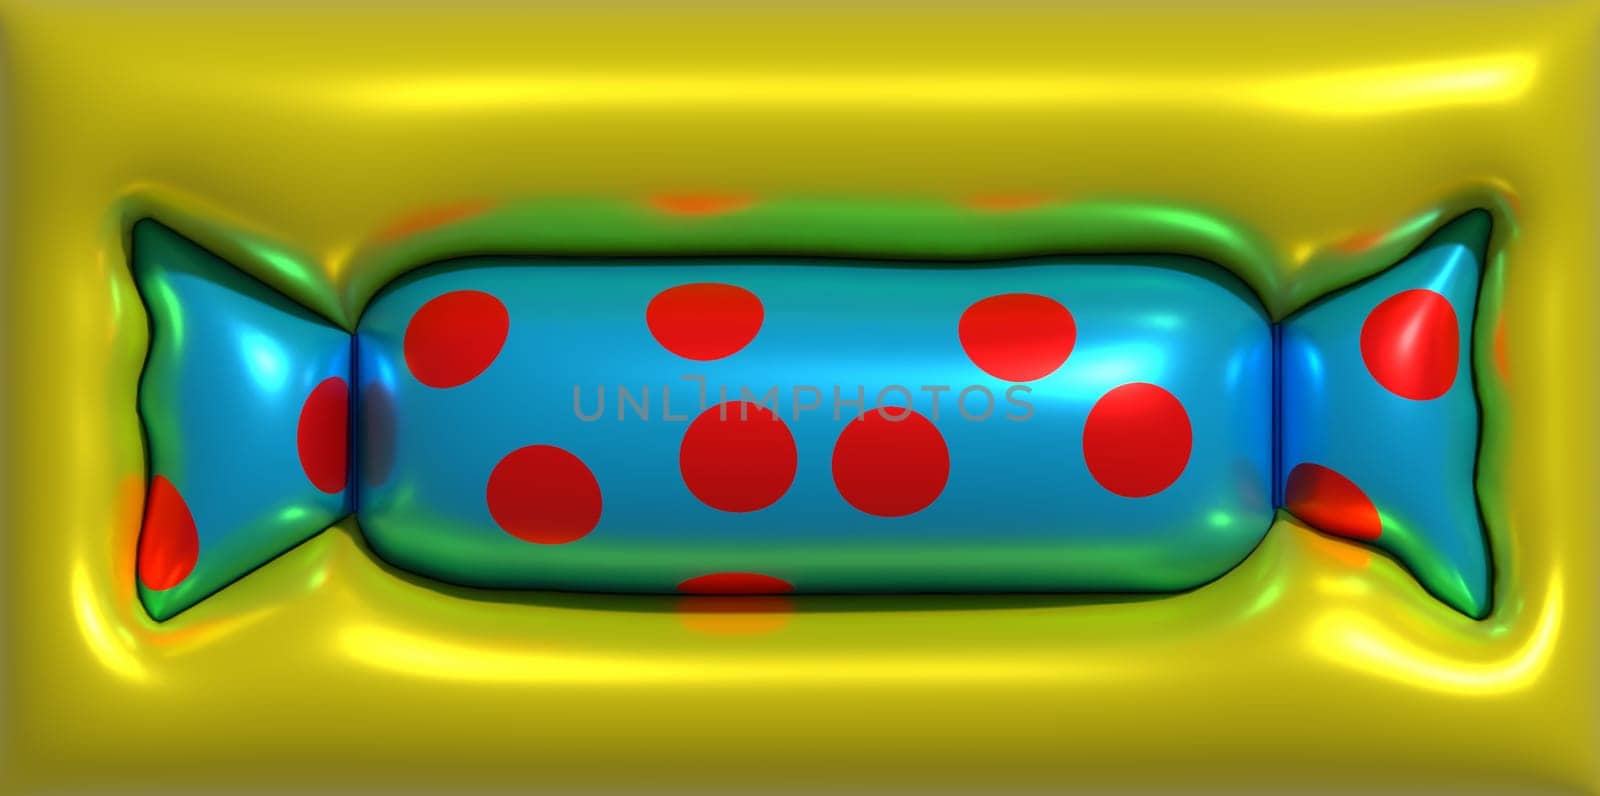 Candy wrapped in a blue wrapper on a yellow background, 3D rendering illustration by ndanko